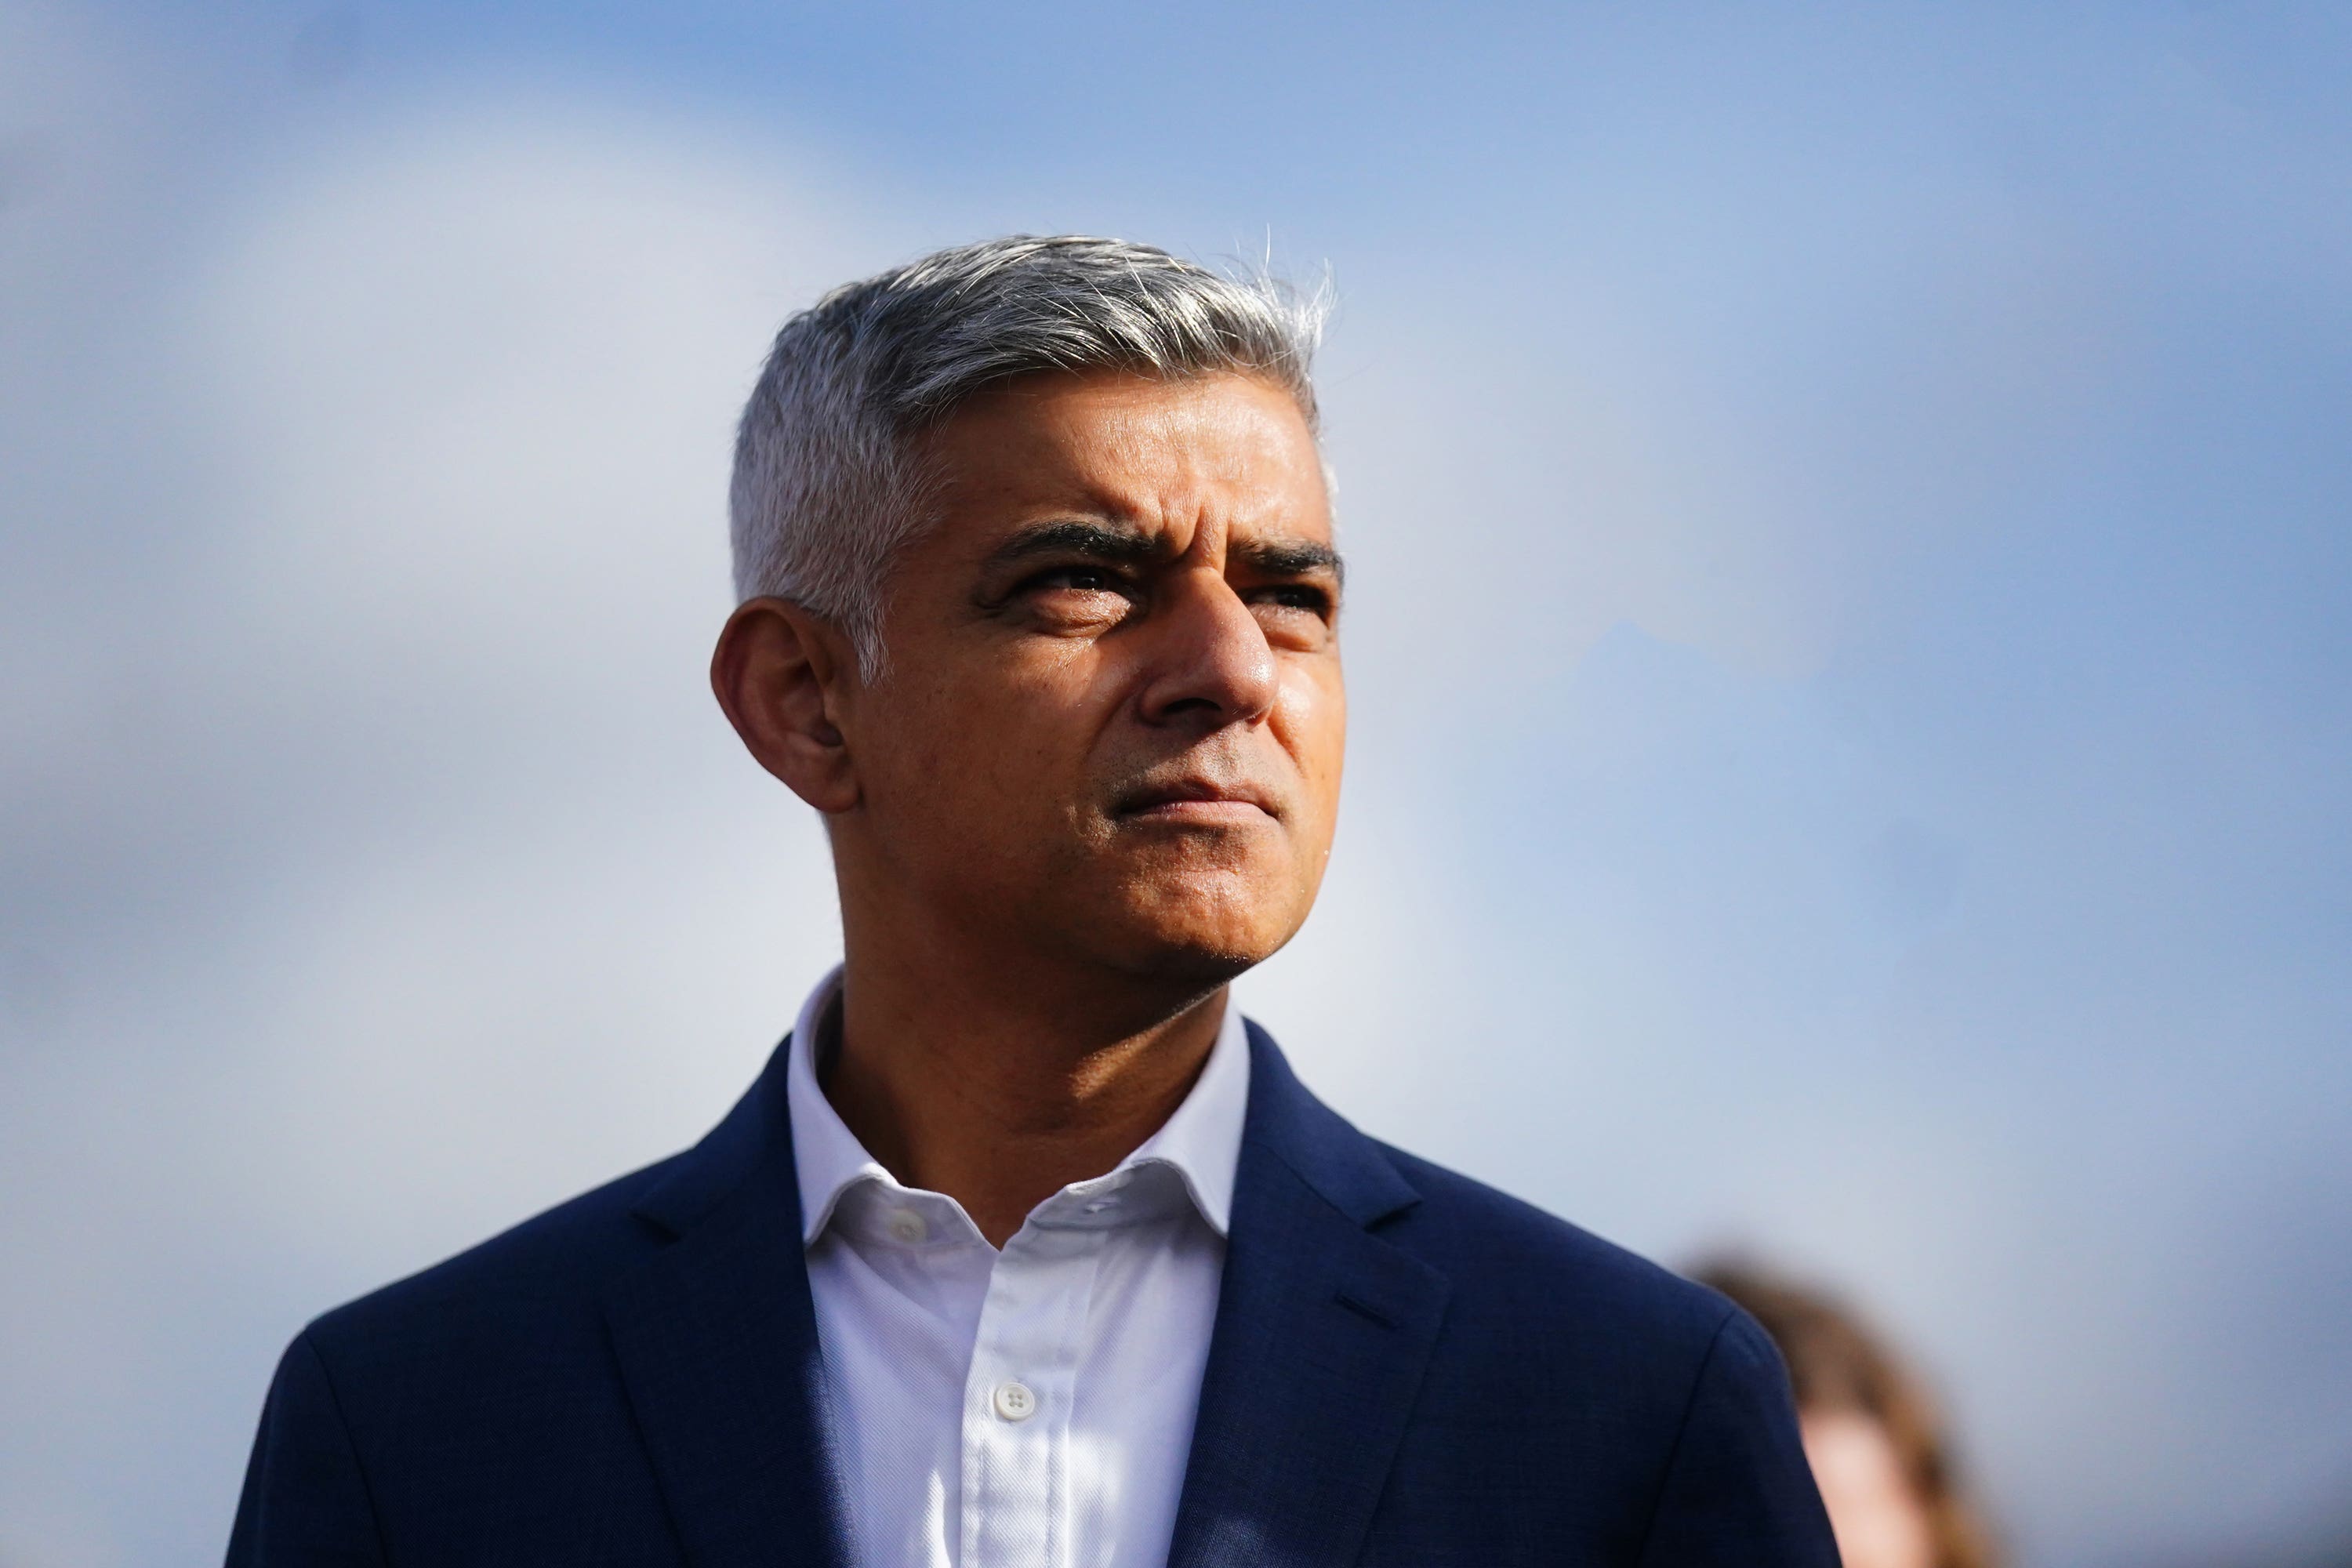 Sadiq Khan has been proven right on the science and the law